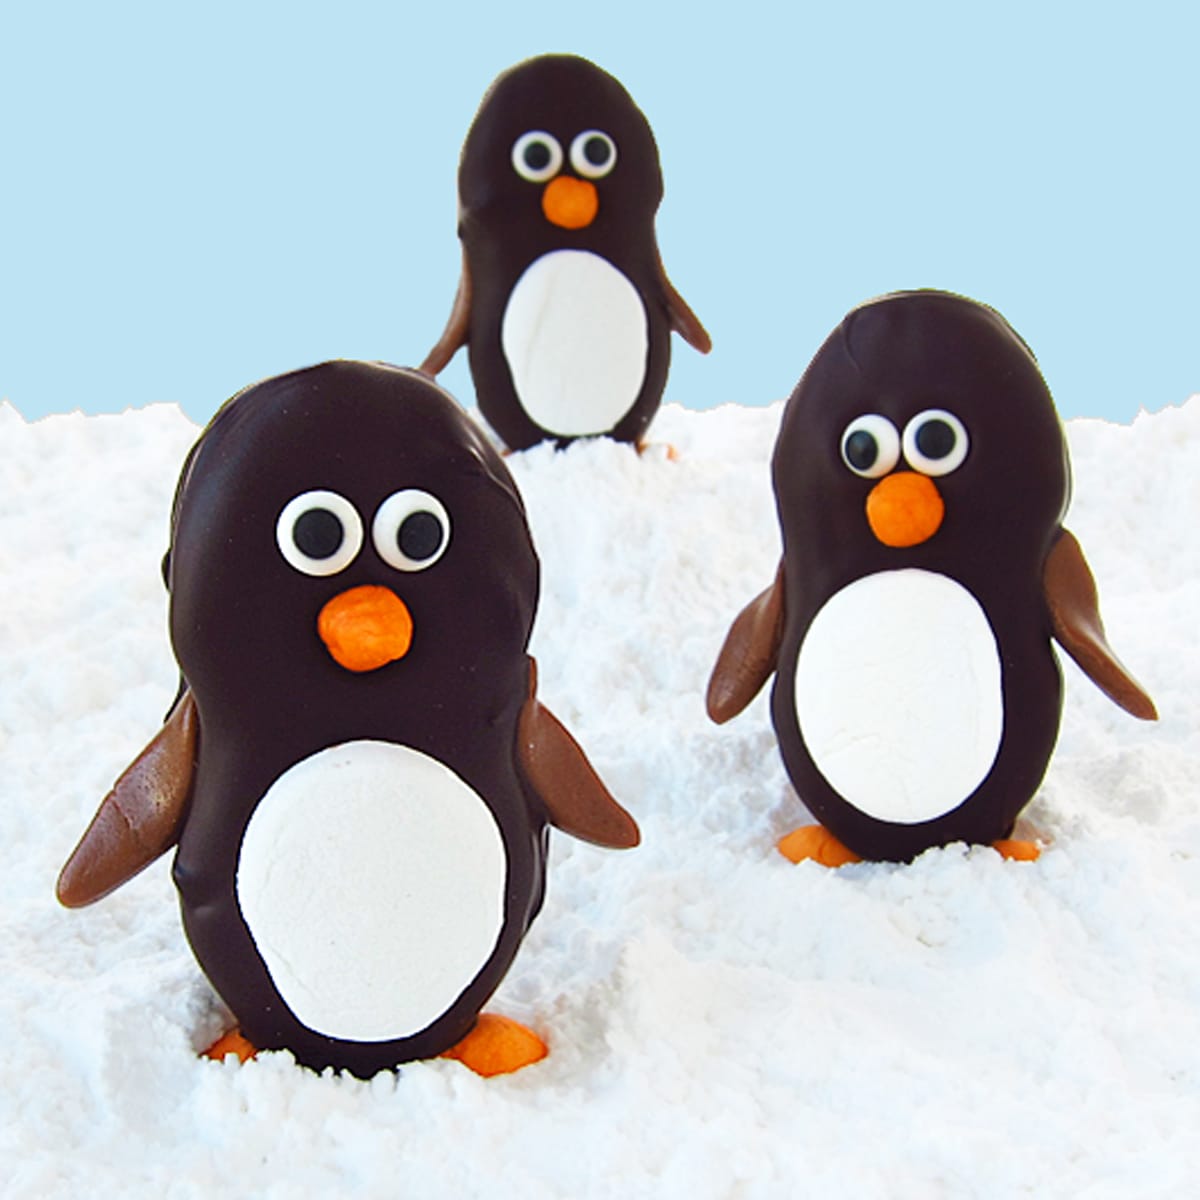 chocolate Nutter Butter penguins on powdered sugar snow with a blue background